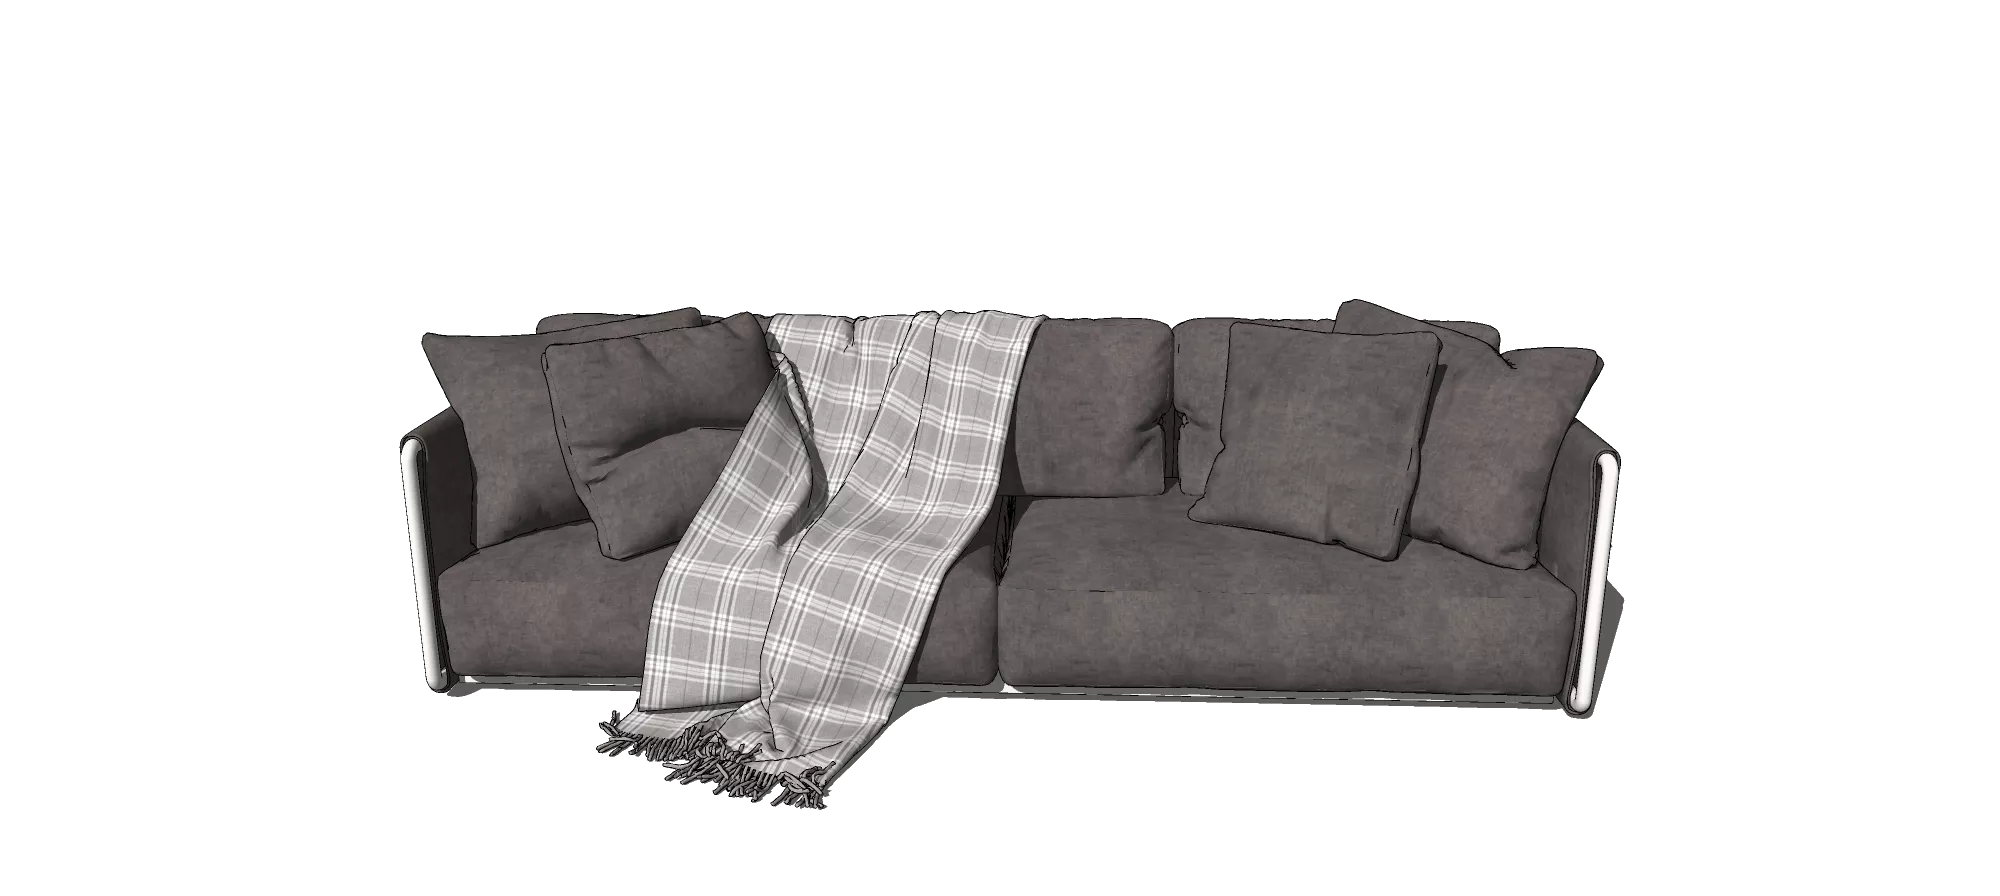 MODERN SOFA - SKETCHUP 3D MODEL - VRAY OR ENSCAPE - ID13108